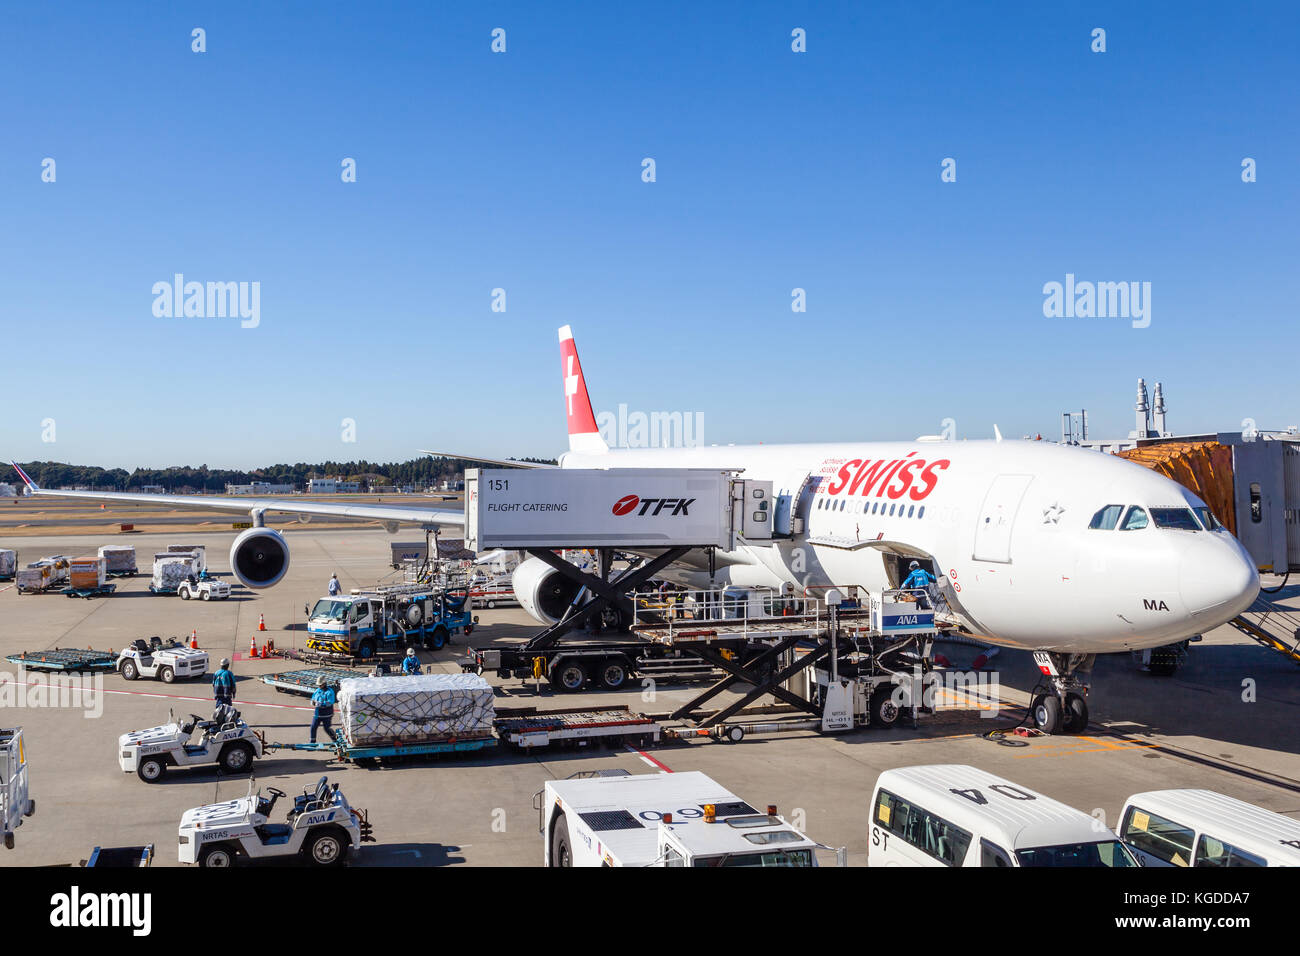 TOKYO, JAPAN - DEC. 5, 2014: A Swiss International Air Lines plane being serviced on the tarmac of Tokyo Narita Airport. The airline was formed after  Stock Photo